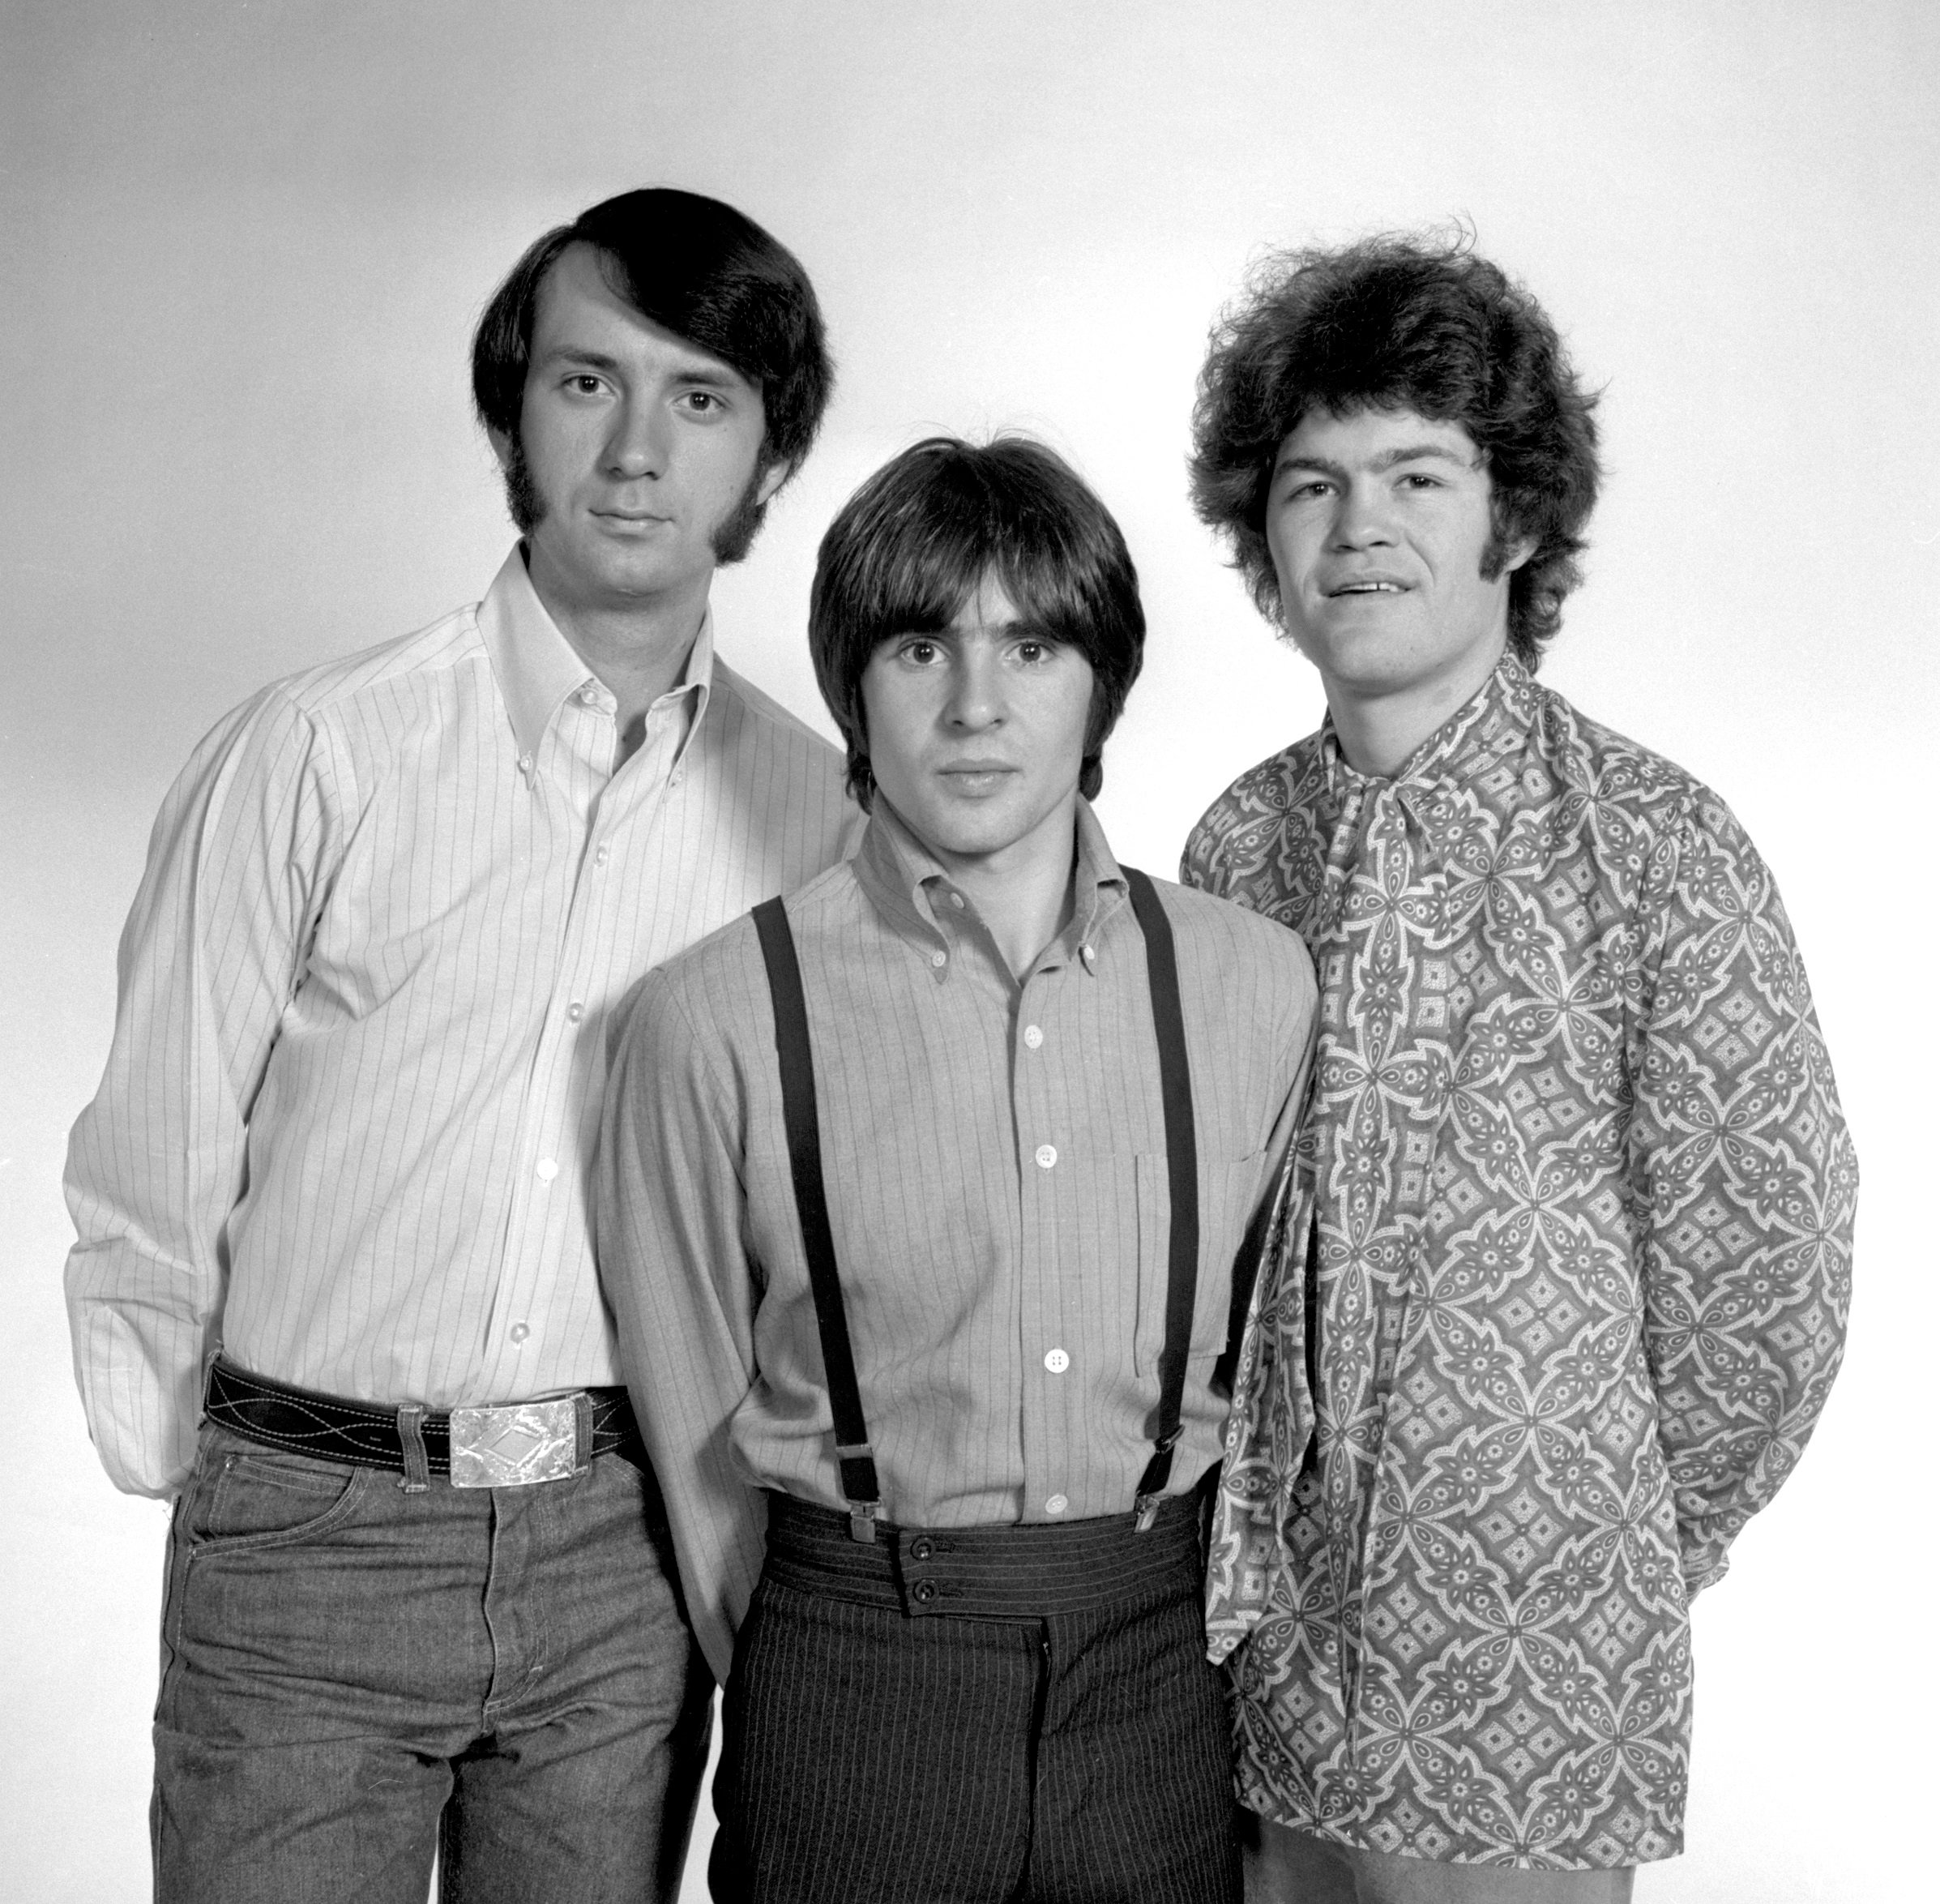 The Monkees' Mike Nesmith, Davy Jones, and Micky Dolenz standing in a row